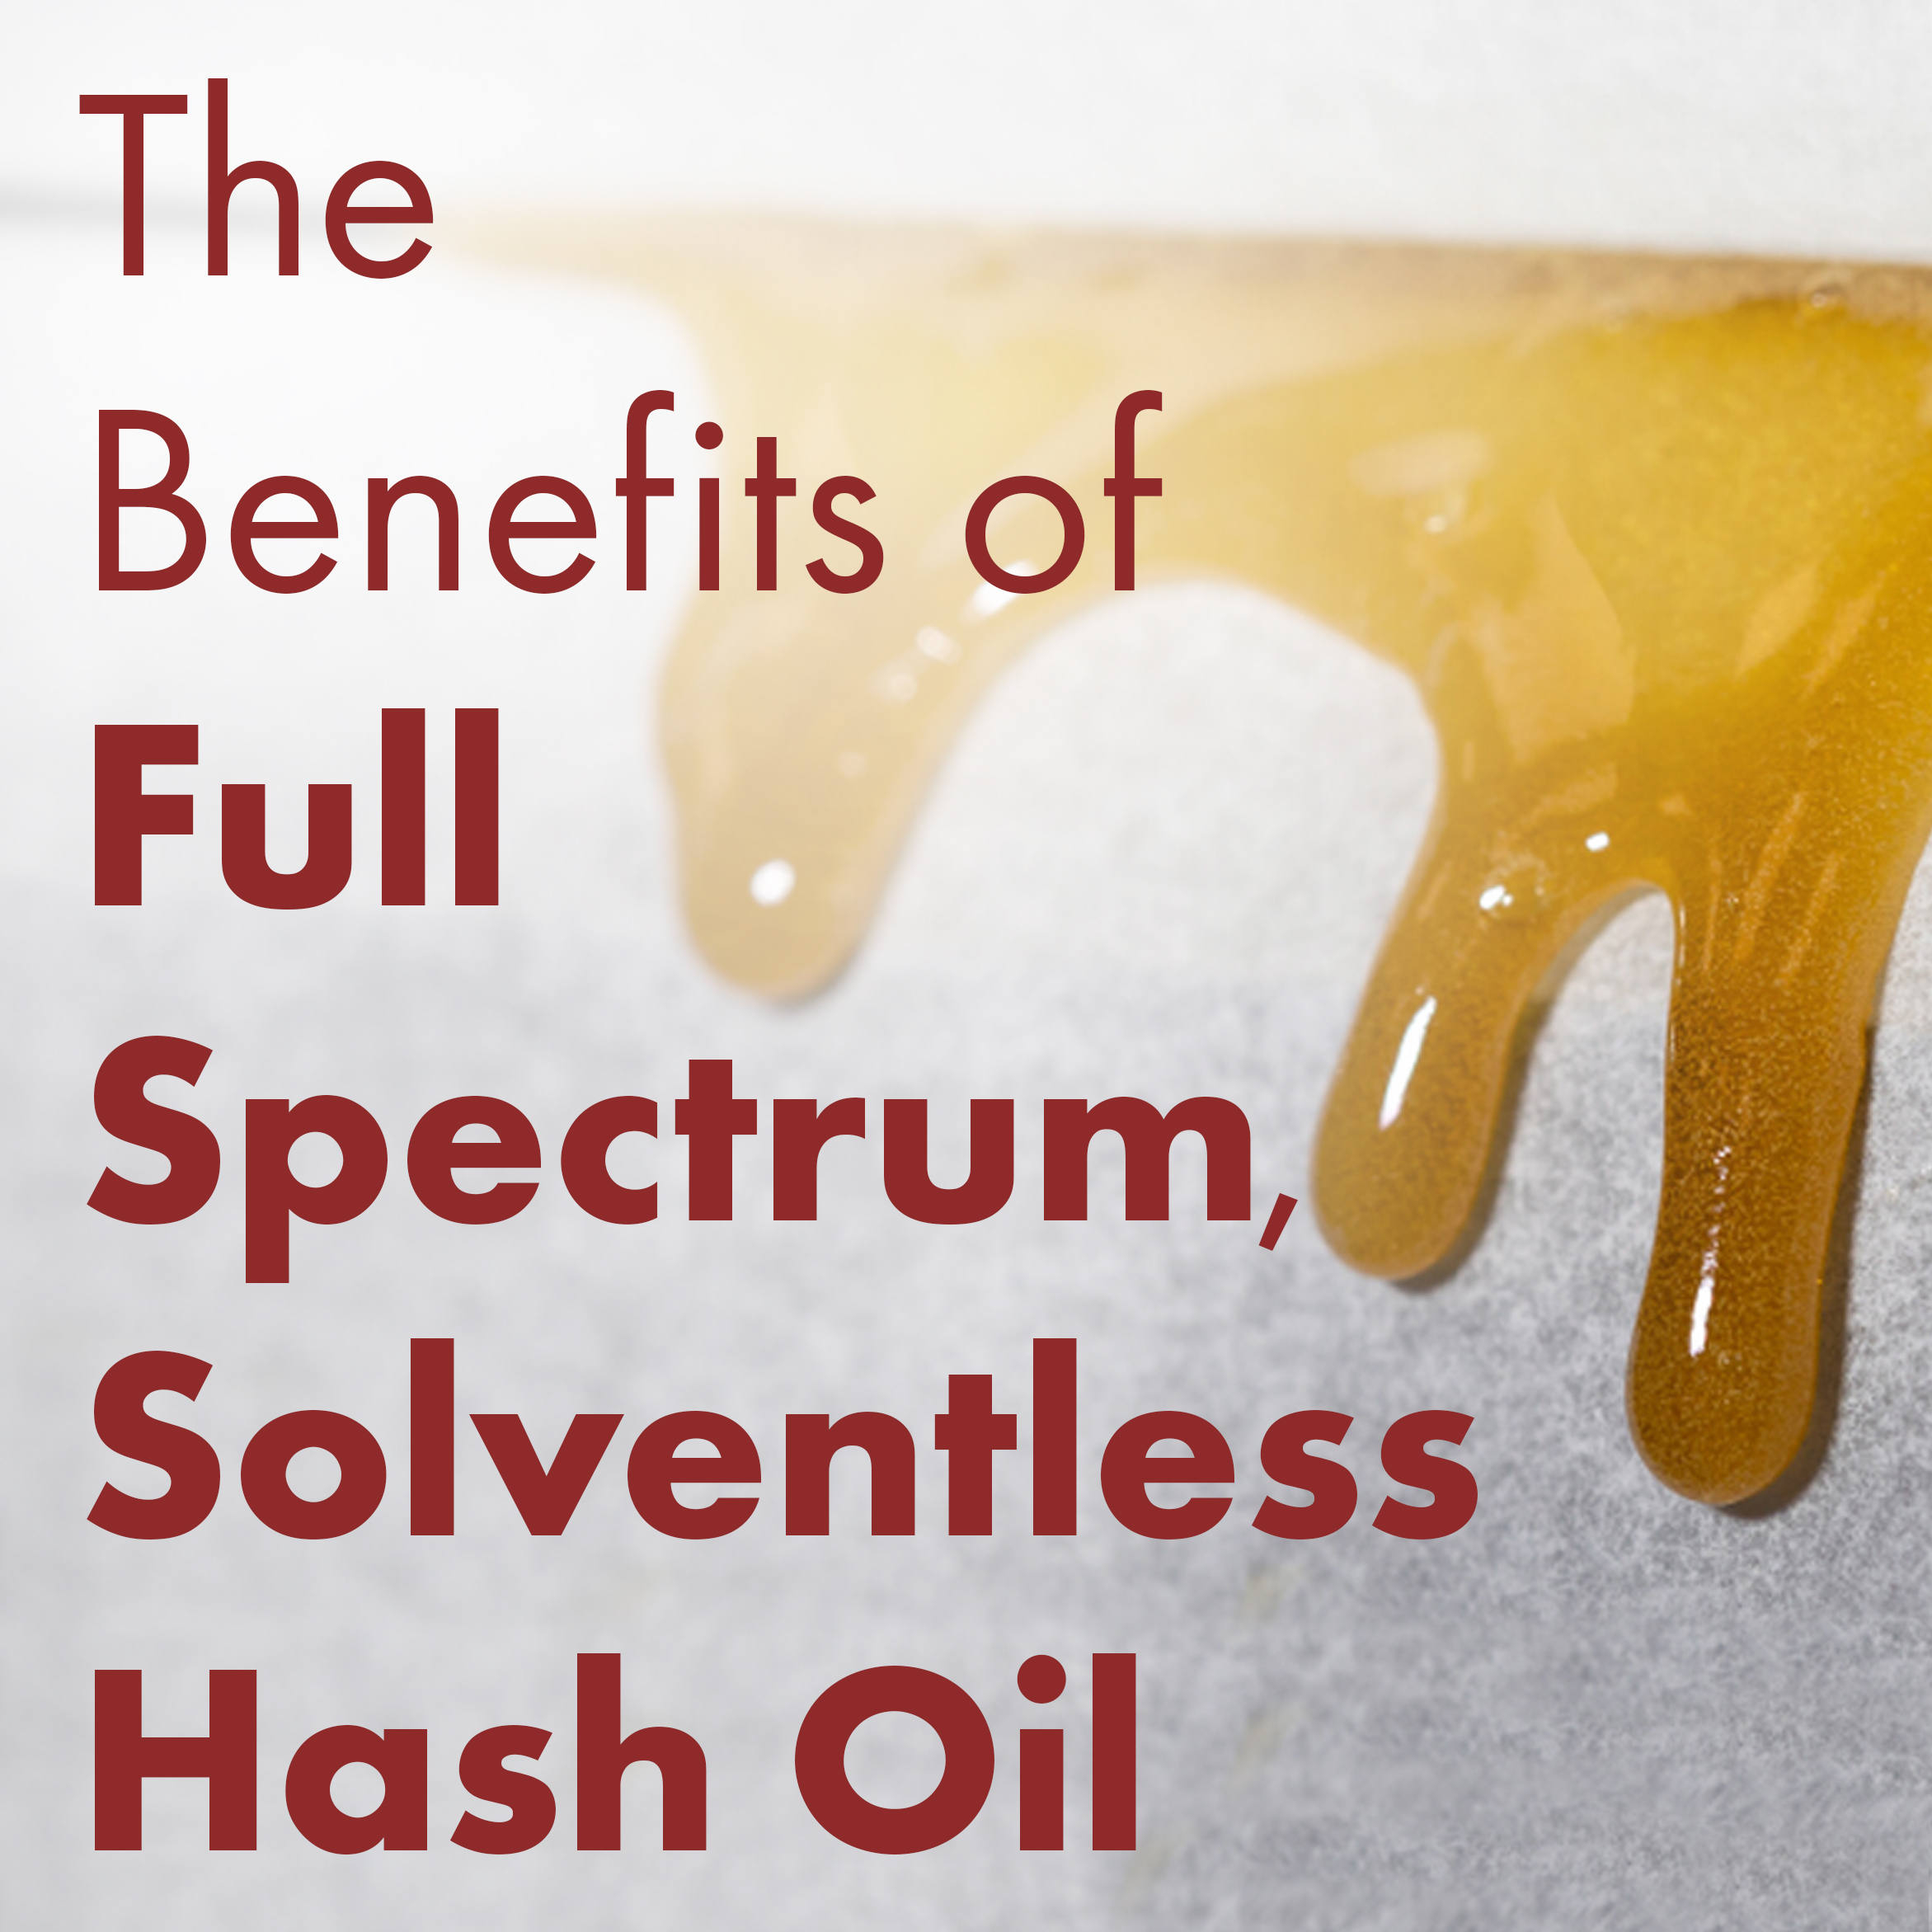 Firelands Scientific  The Benefits of Solventless, Full Spectrum Products